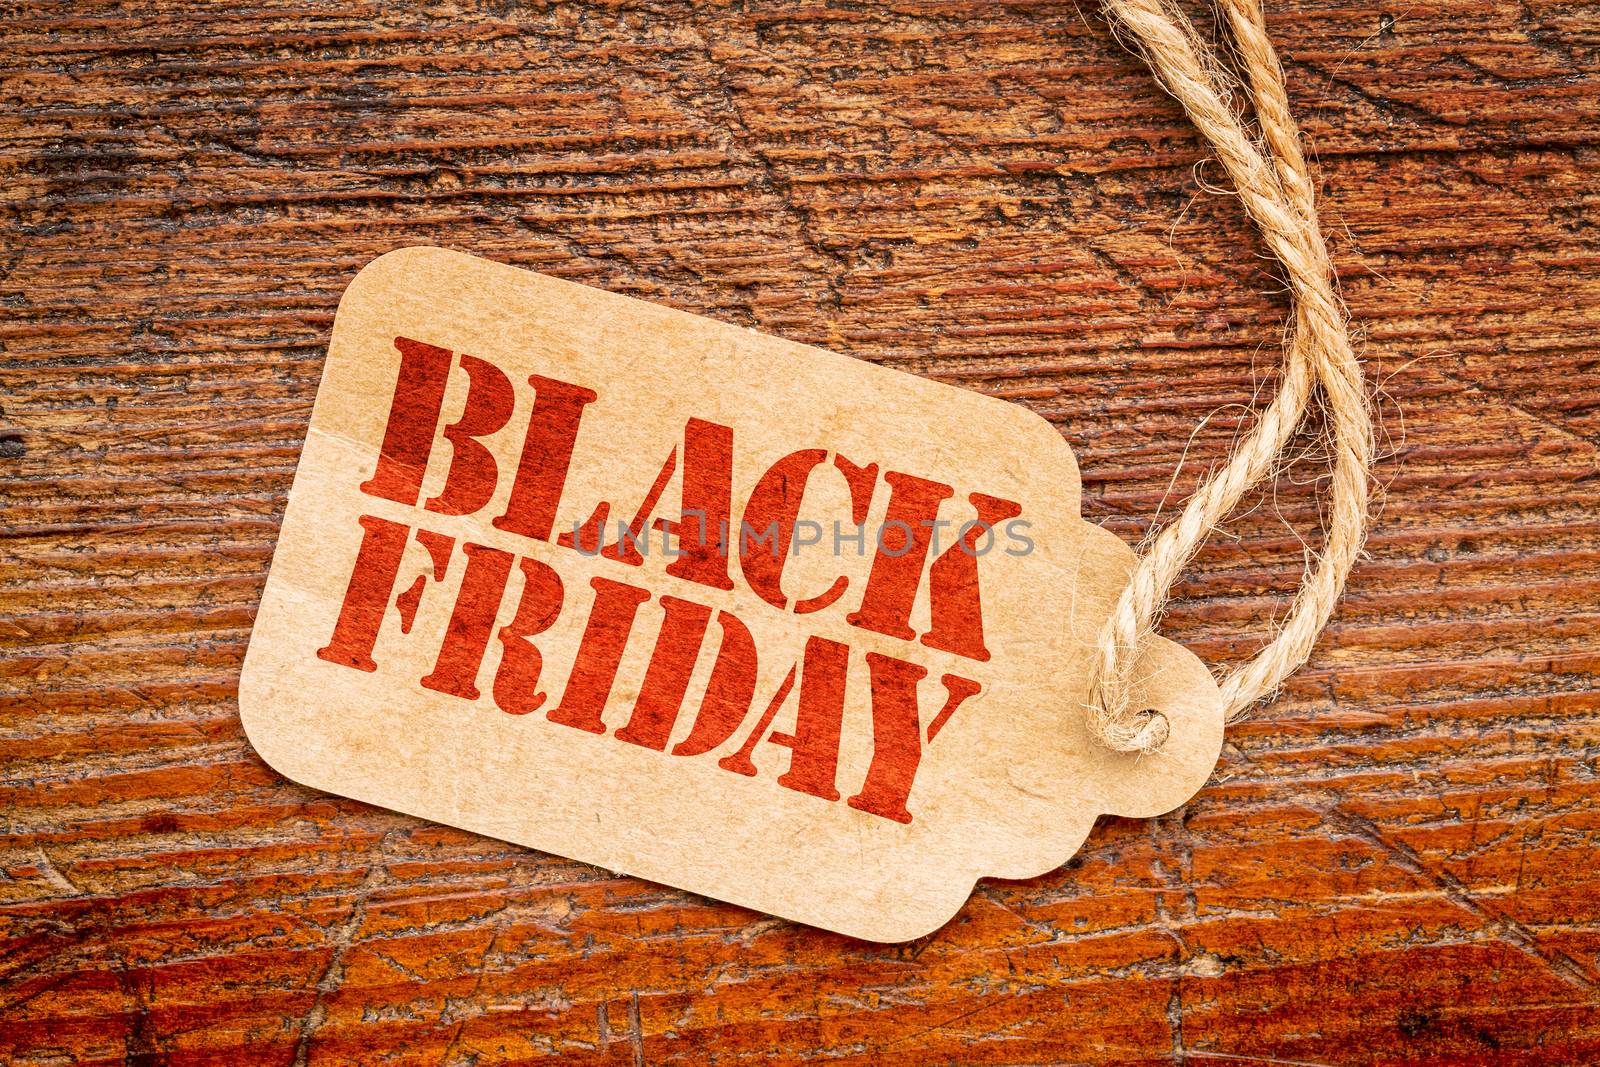 Black Friday sign a paper price tag against rustic red painted barn wood